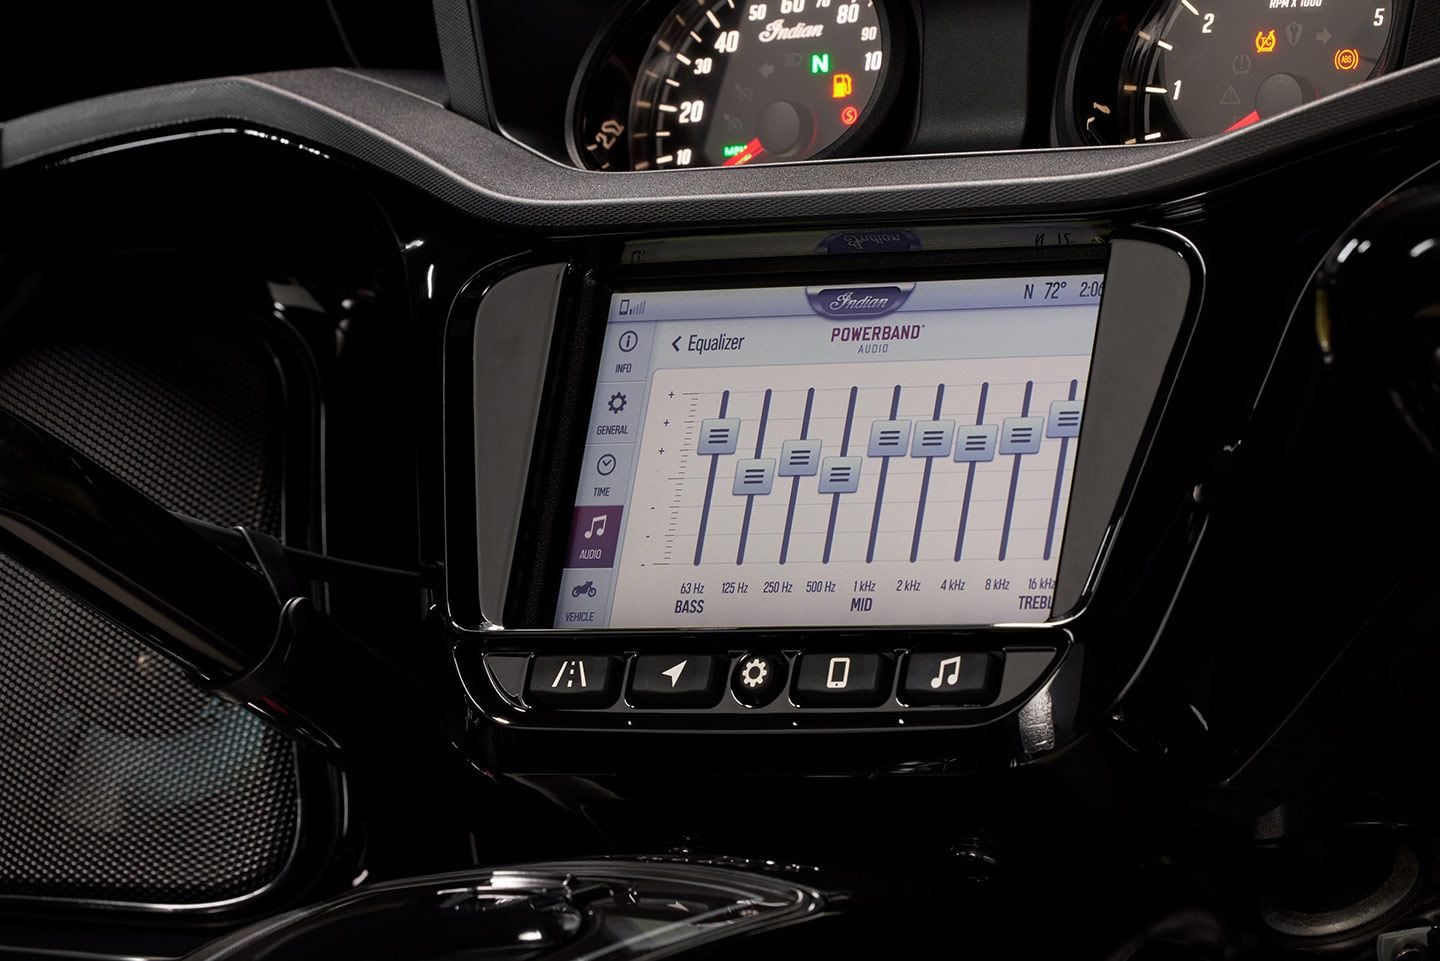 The new audio system uses Ride Command on the 7-inch display to access amplifiers and a nine-band equalizer for higher volume and better clarity at speed.